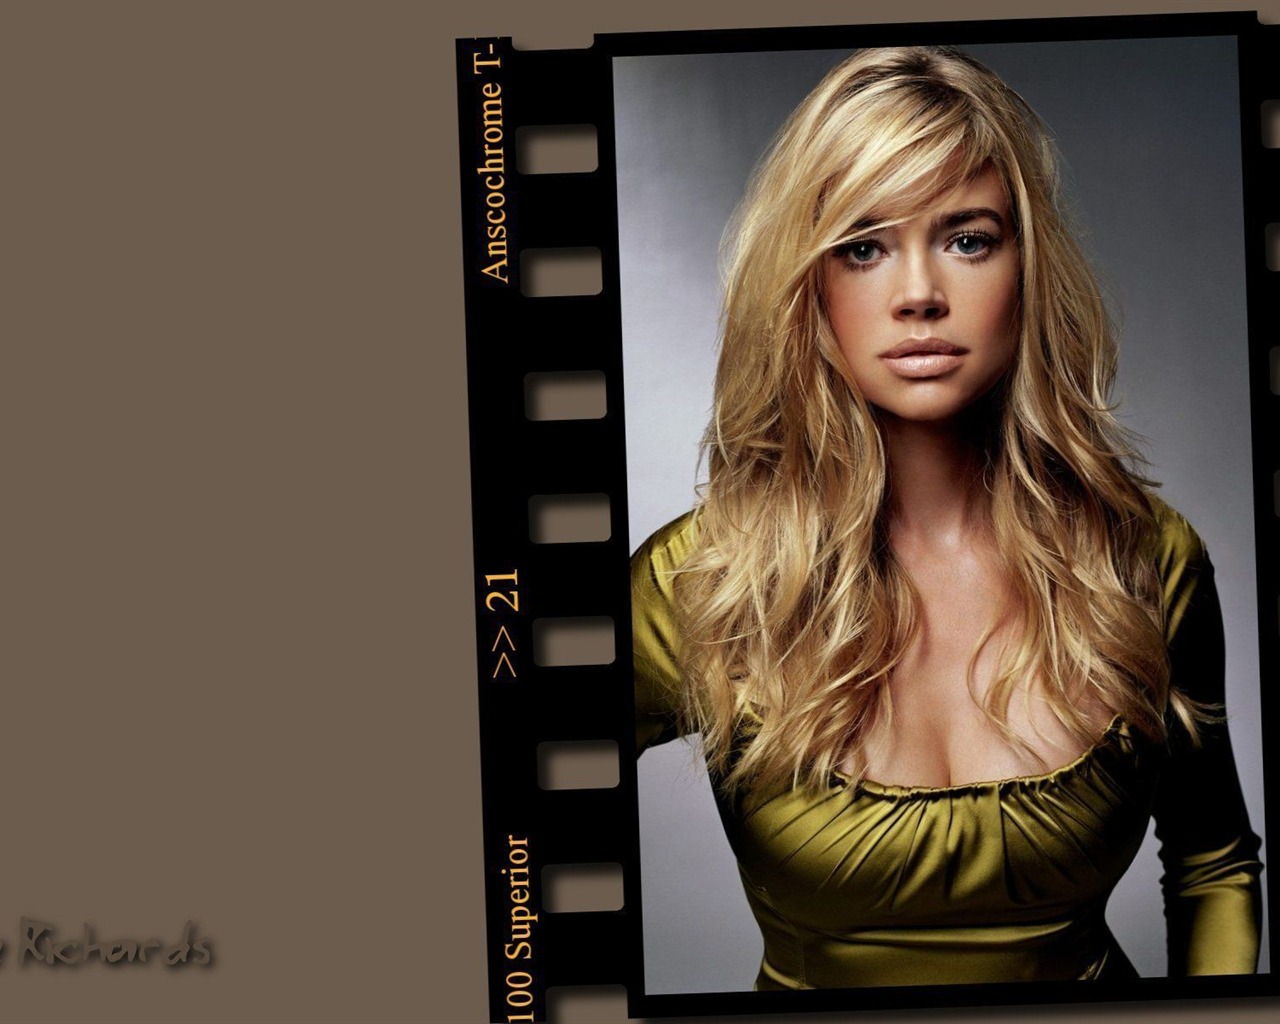 Denise Richards #003 - 1280x1024 Wallpapers Pictures Photos Images